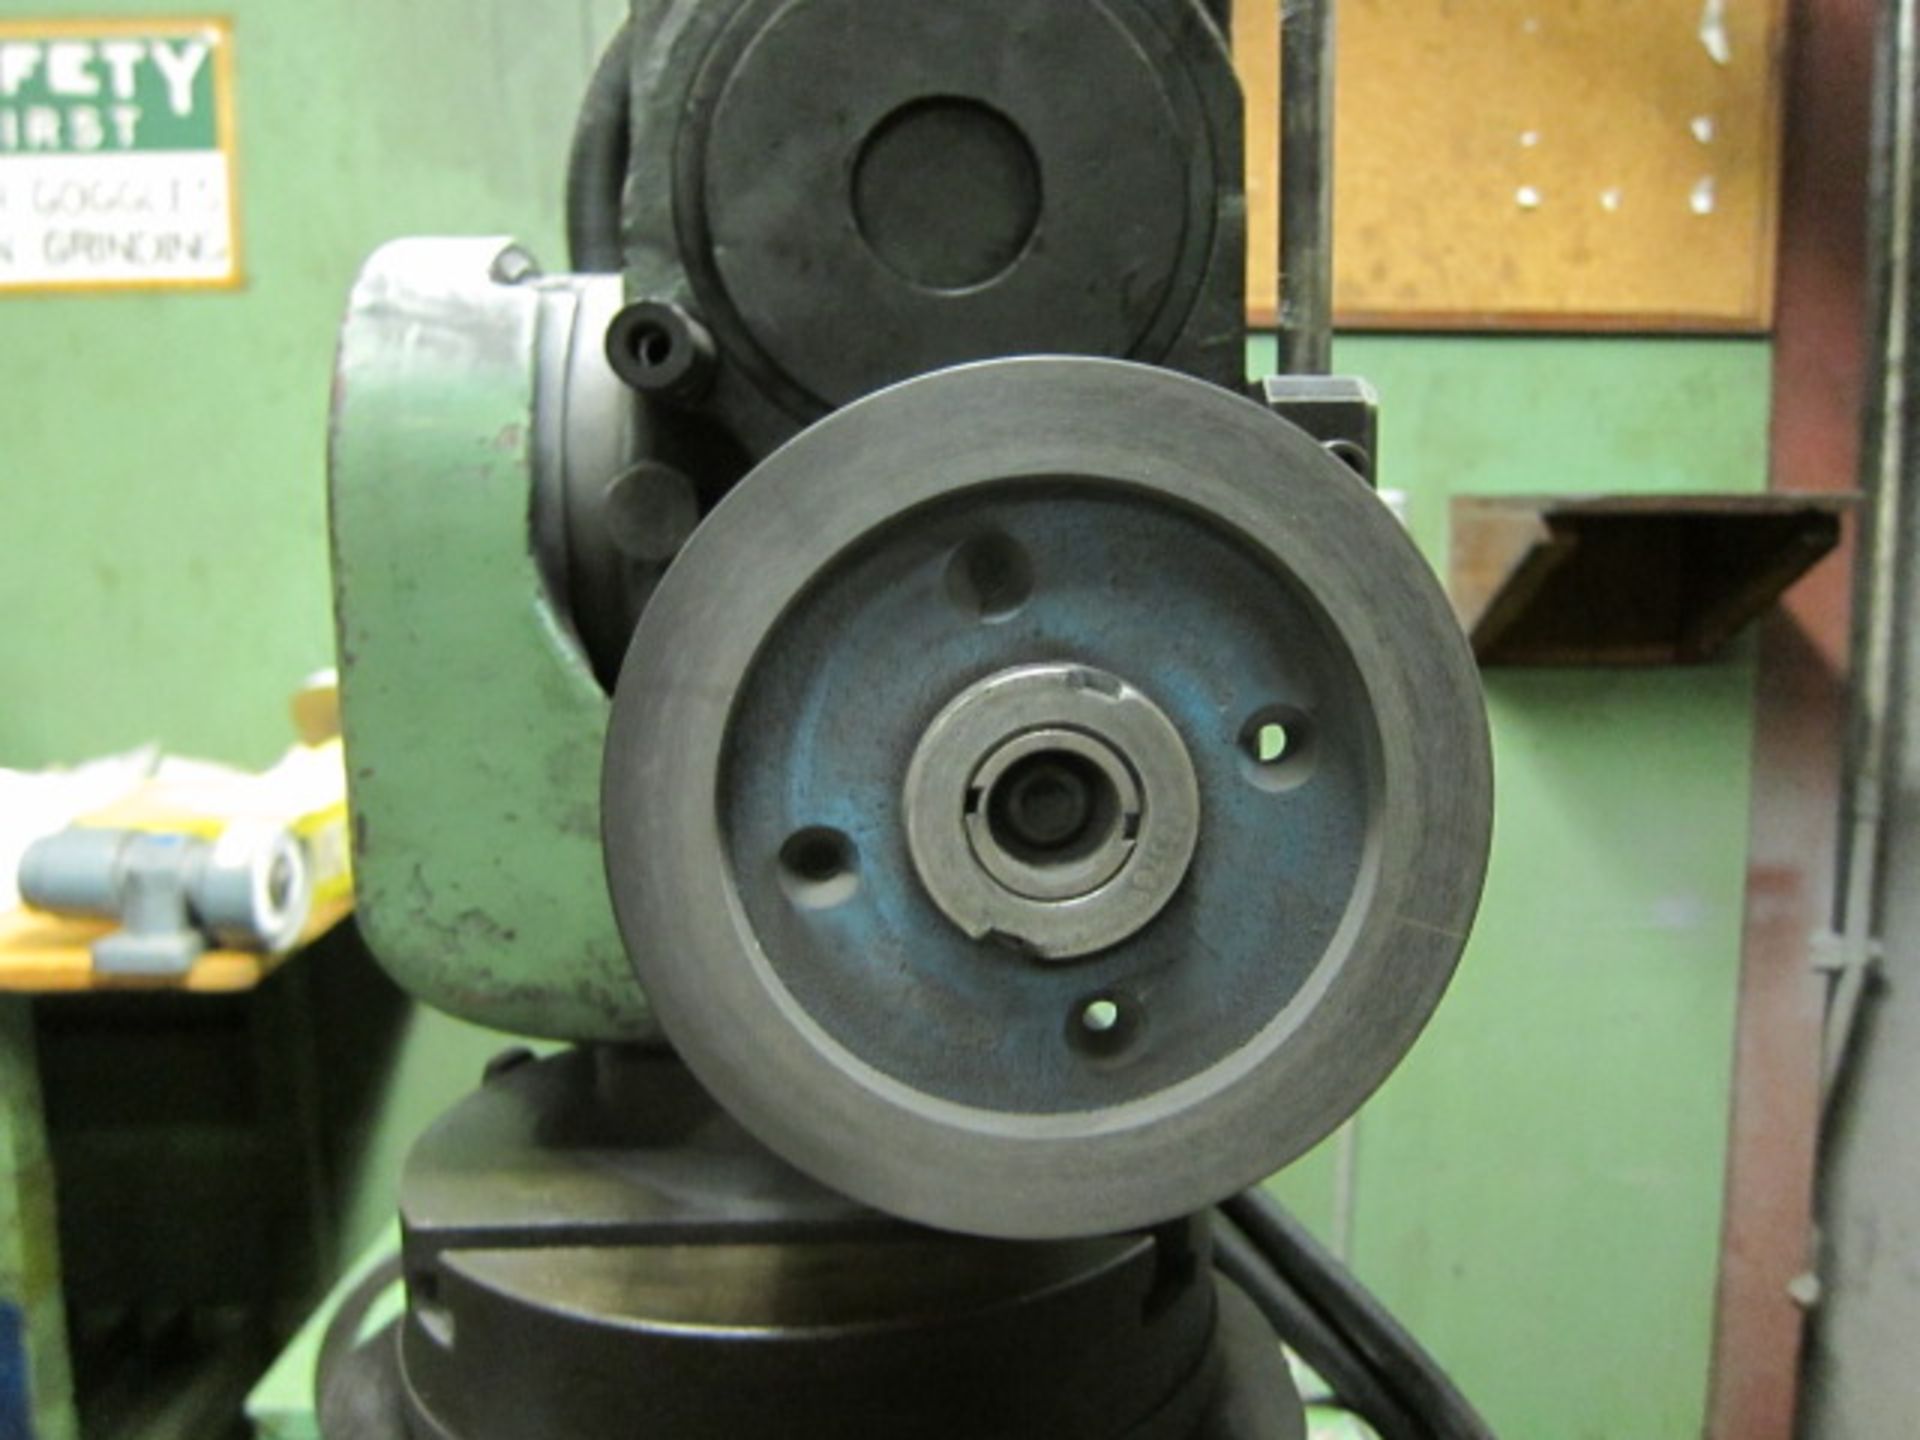 TOOL & CUTTER GRINDER, CINCINNATI NO. 2, 6” x 35-½” pwr. feed swivel table, Torit dust collector, - Image 4 of 10